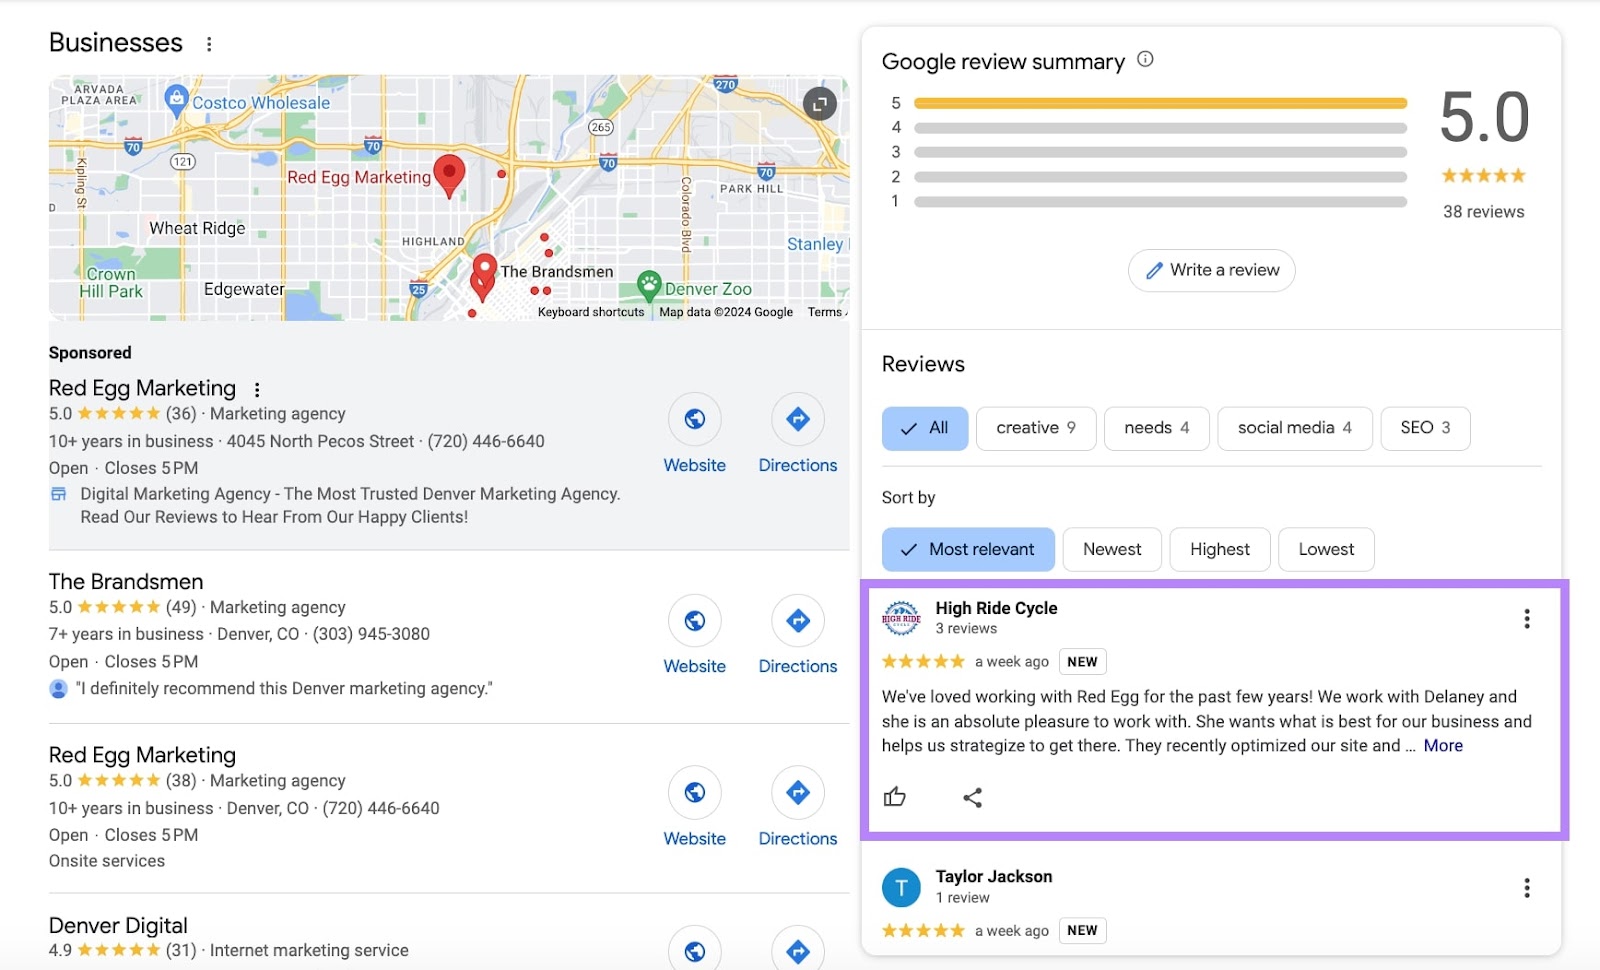 Businesses results on Google SERP, showing reviews summary for a selected business